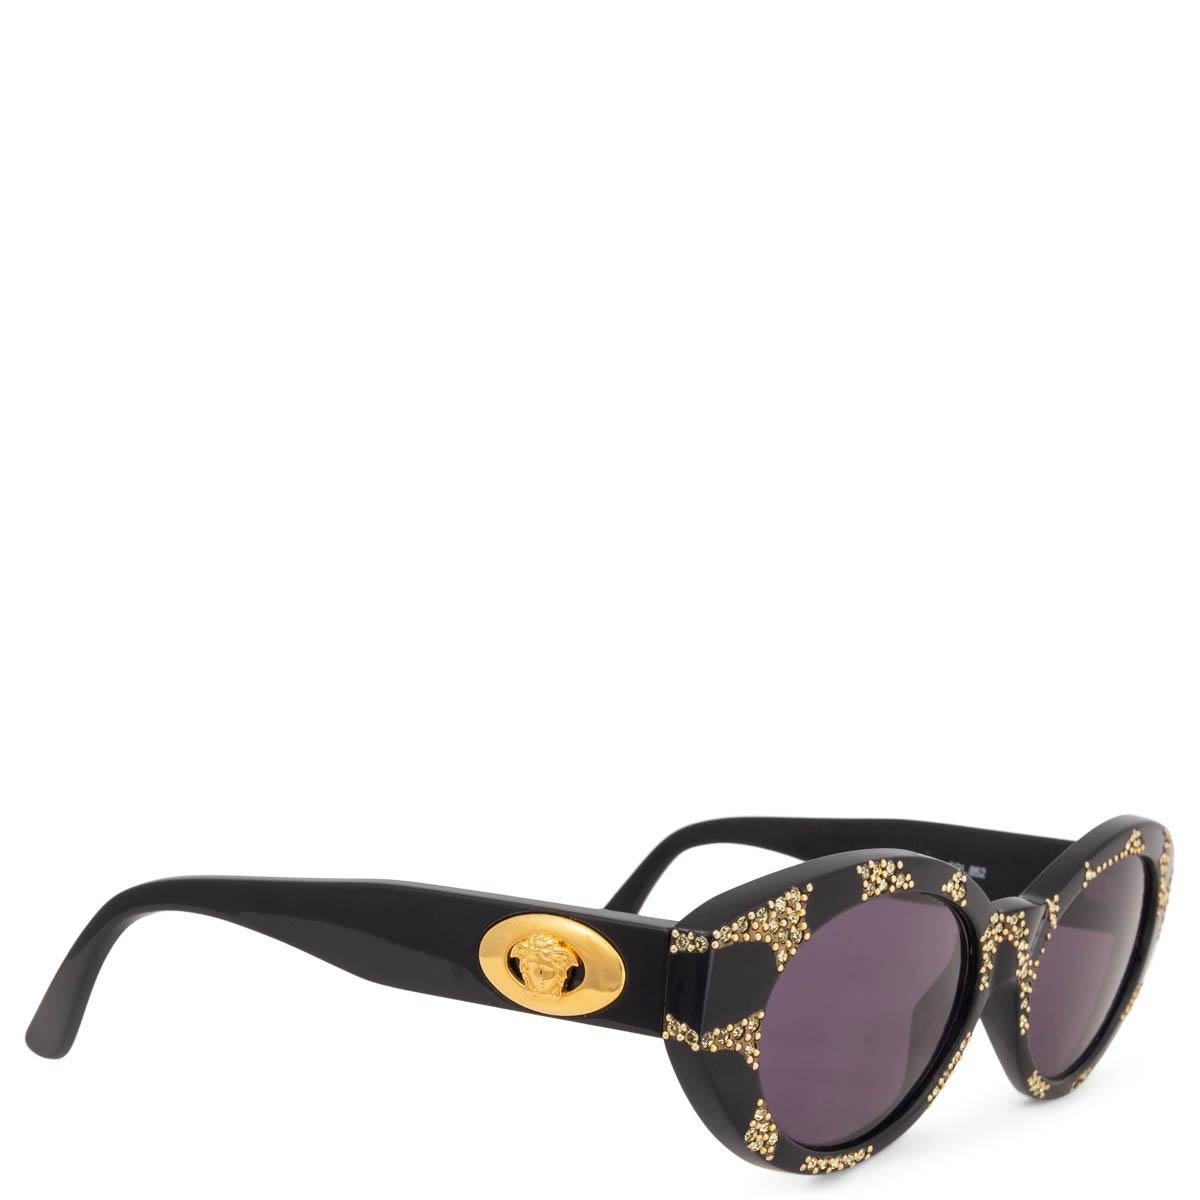 100% authentic Gianni Versace vintage sunglasses in black acetate with gold-tone glitter pattern and gold-tone Medusa on the side. Grey lenses. Have been worn and are in excellent condition. Come with case. 

Measurements
Model	480/W
Width	15cm